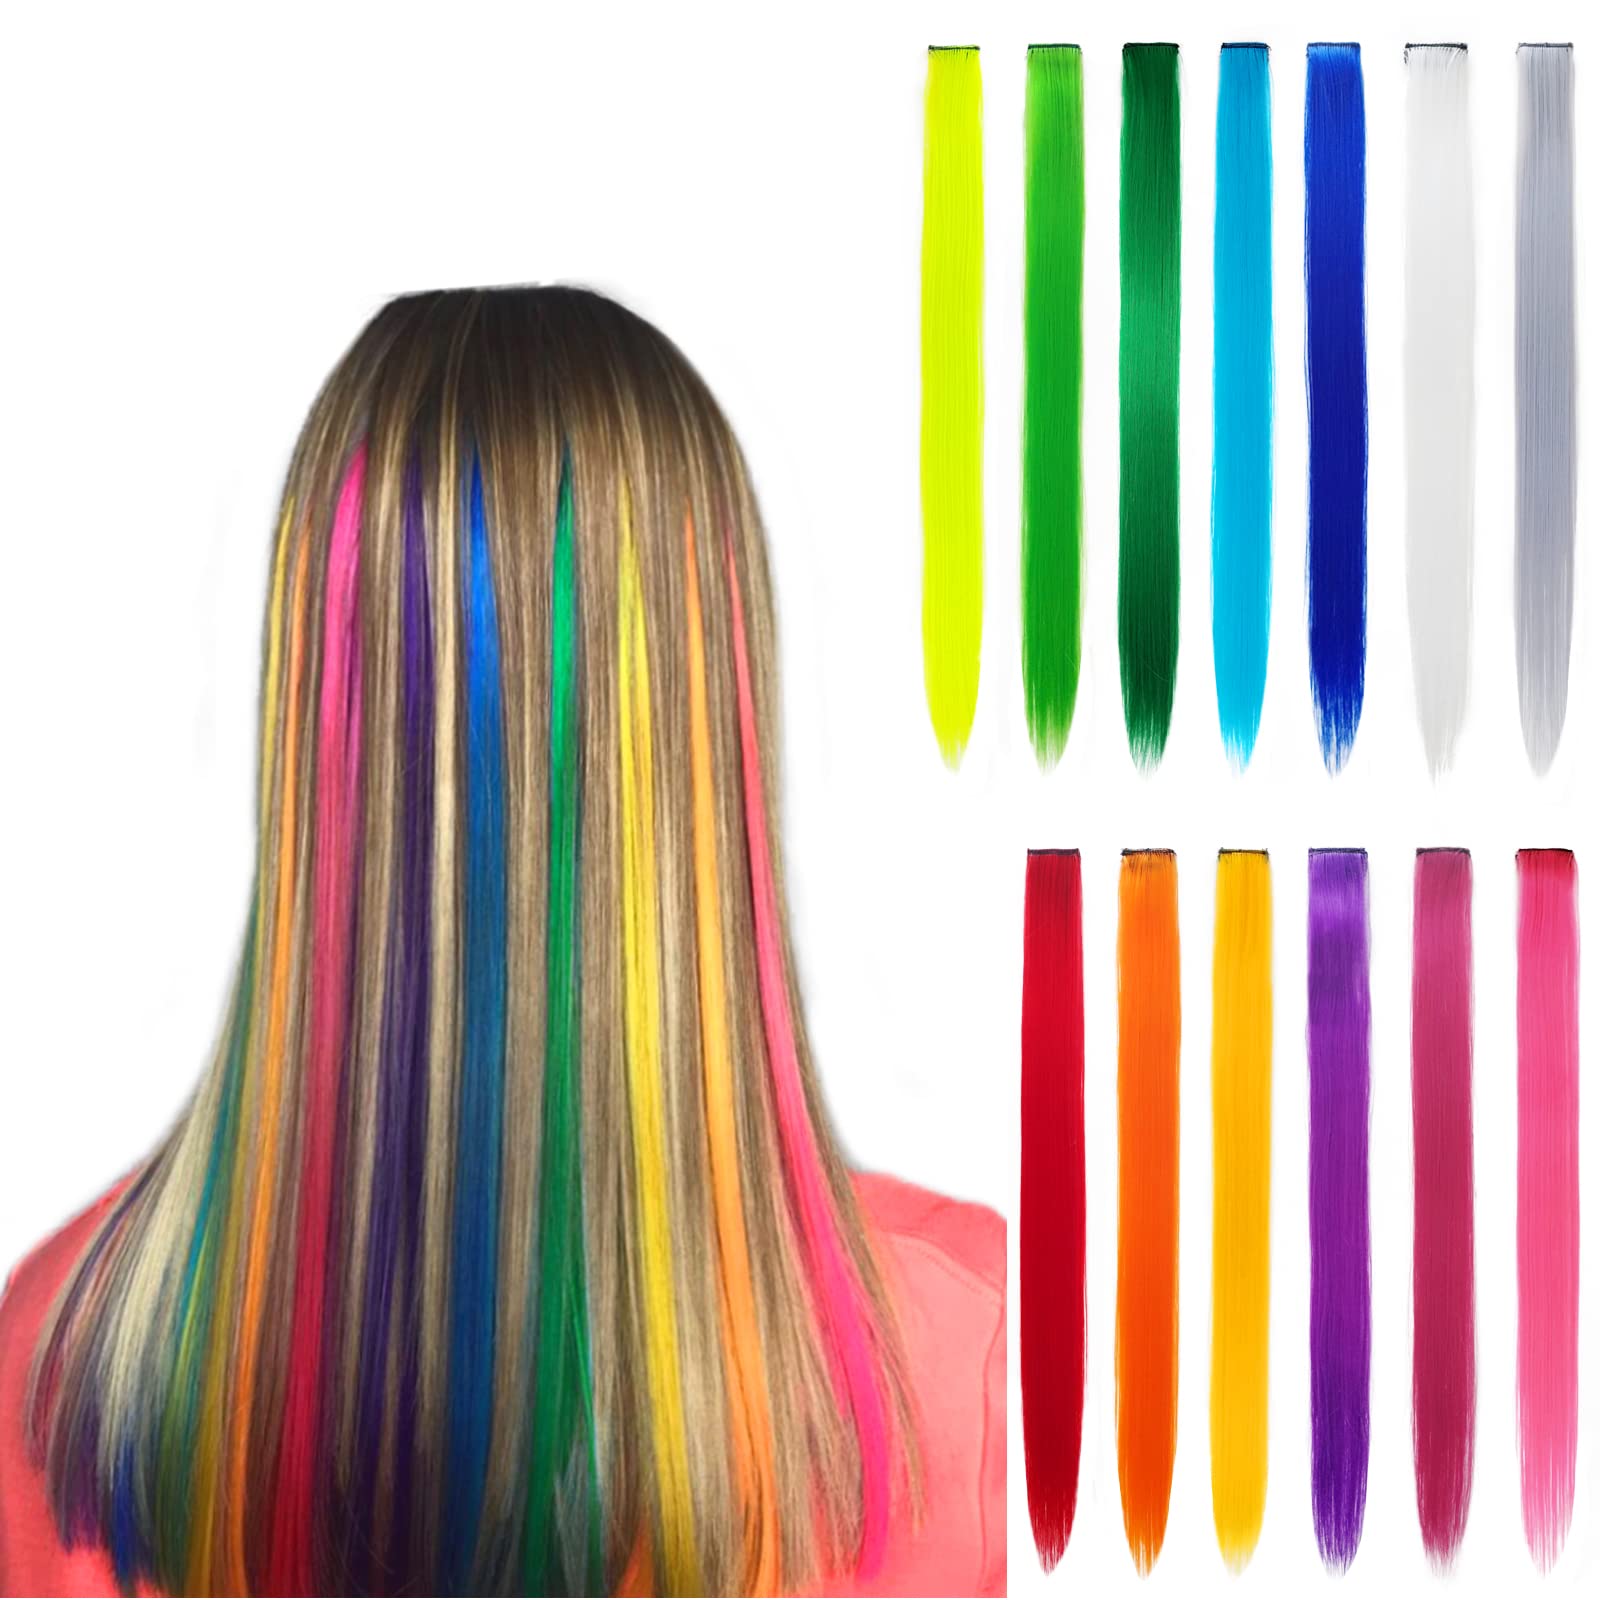 13 Pcs Colored Hair Extensions 20 Inch